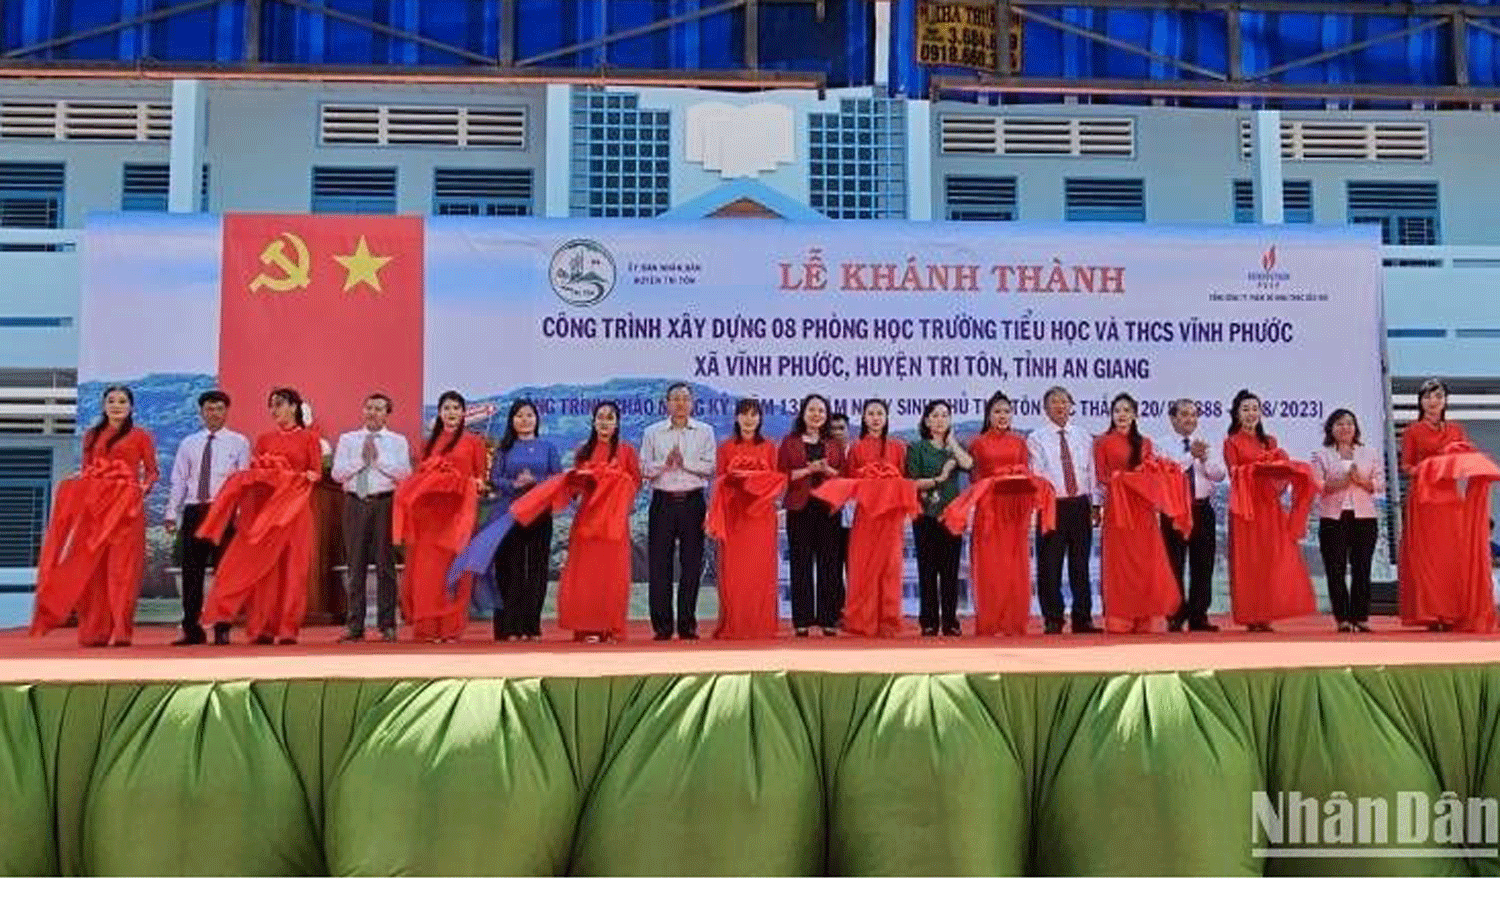 ABO/NDO- Vice President Vo Thi Anh Xuan was present at Vinh Phuoc commune, Tri Ton district, An Giang province on August 14, to inaugurate eight classrooms at Vinh Phuoc Primary and Secondary School.